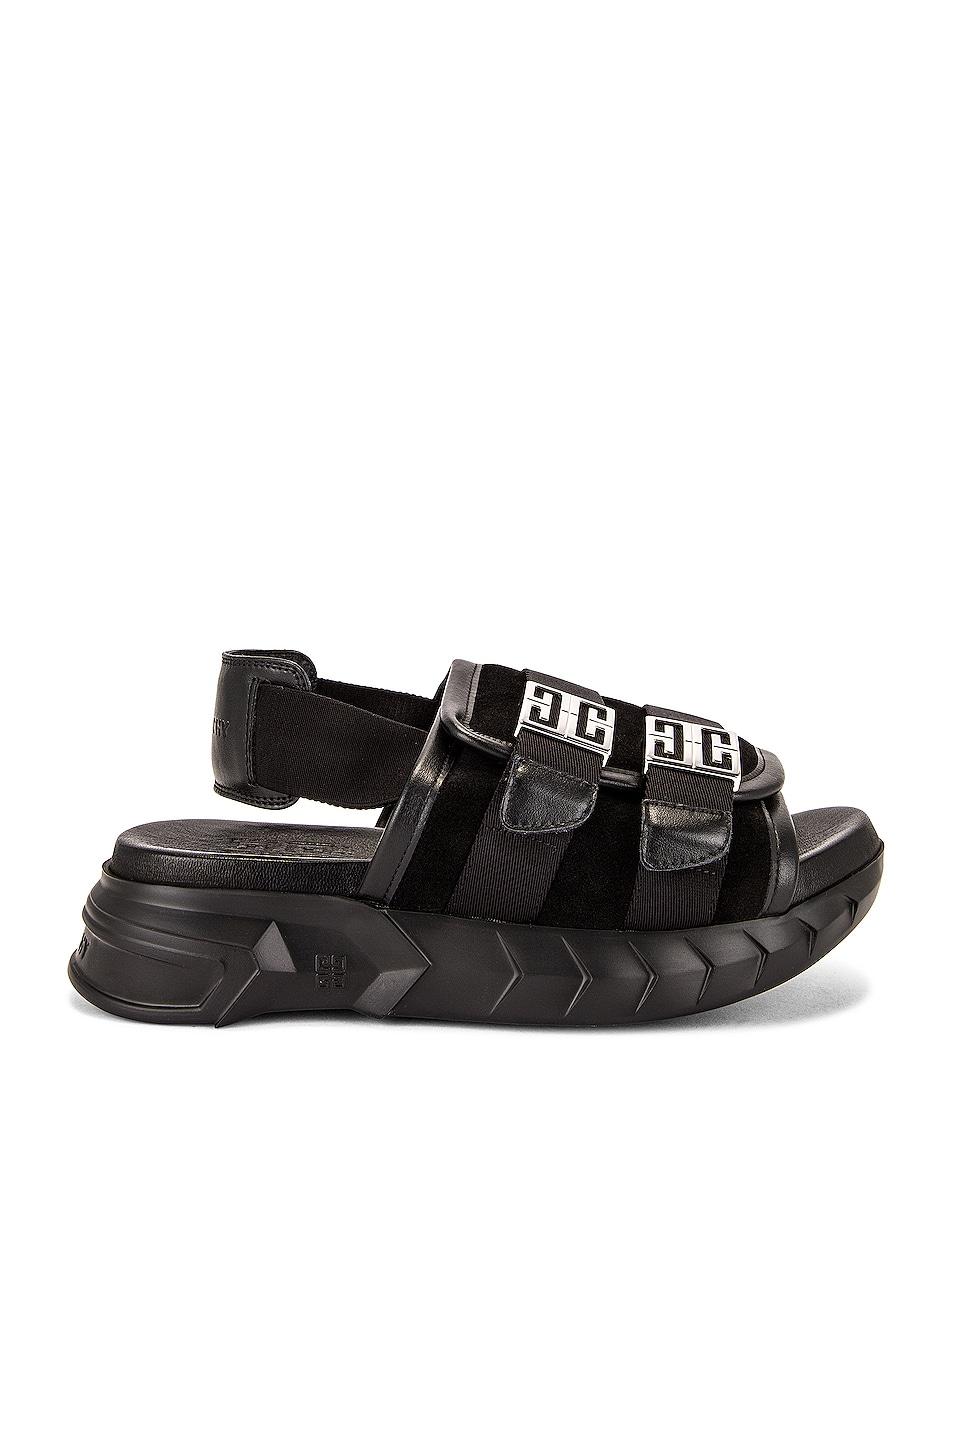 Givenchy Suede Marshmallow Slingback Sandals in Black | Lyst